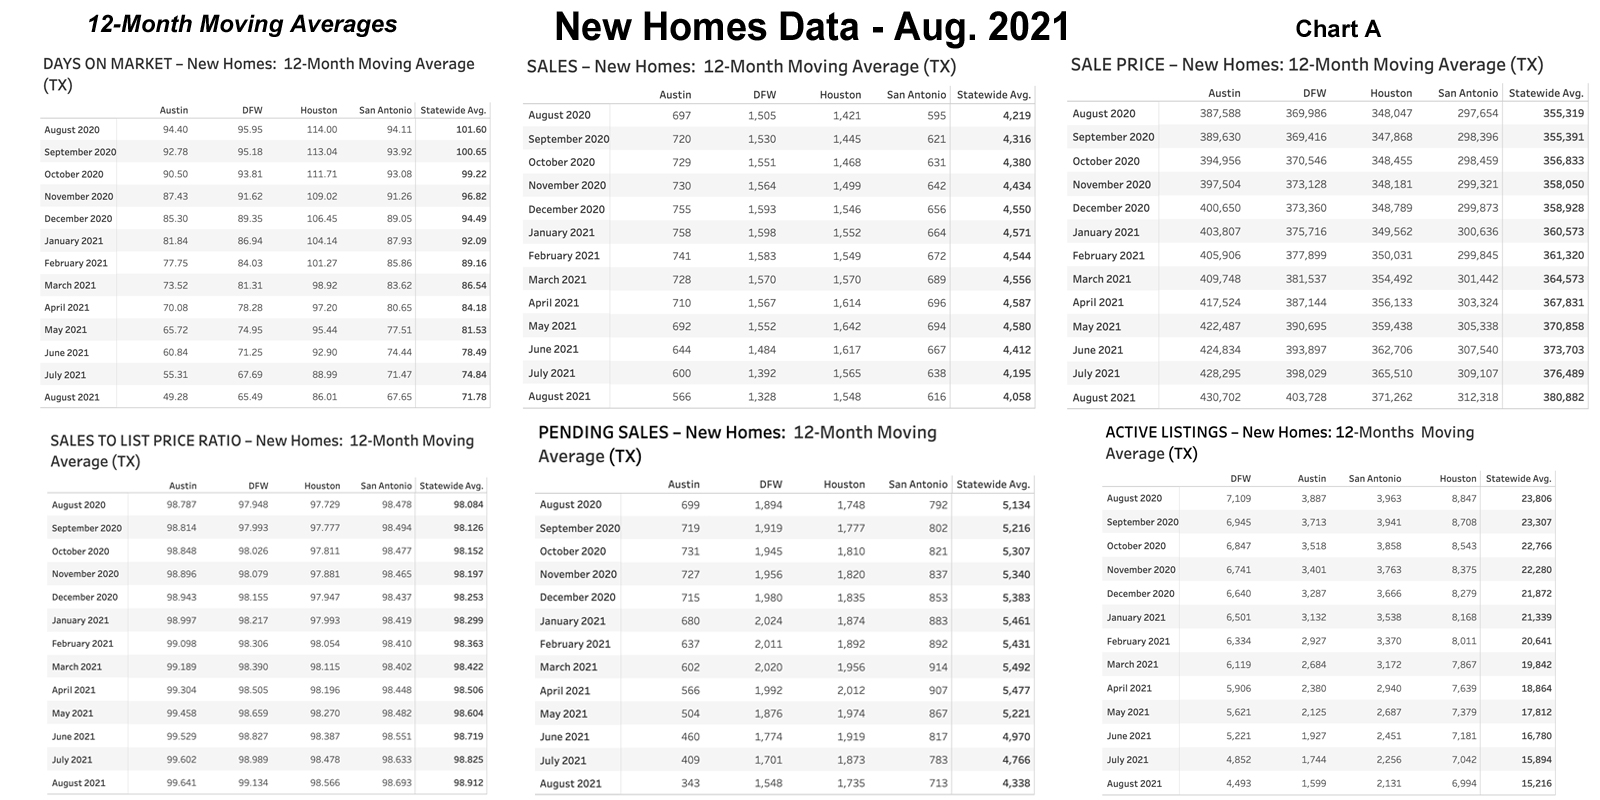 Chart A - Texas New Home Sales: 12-Month Moving Averages - August 2021